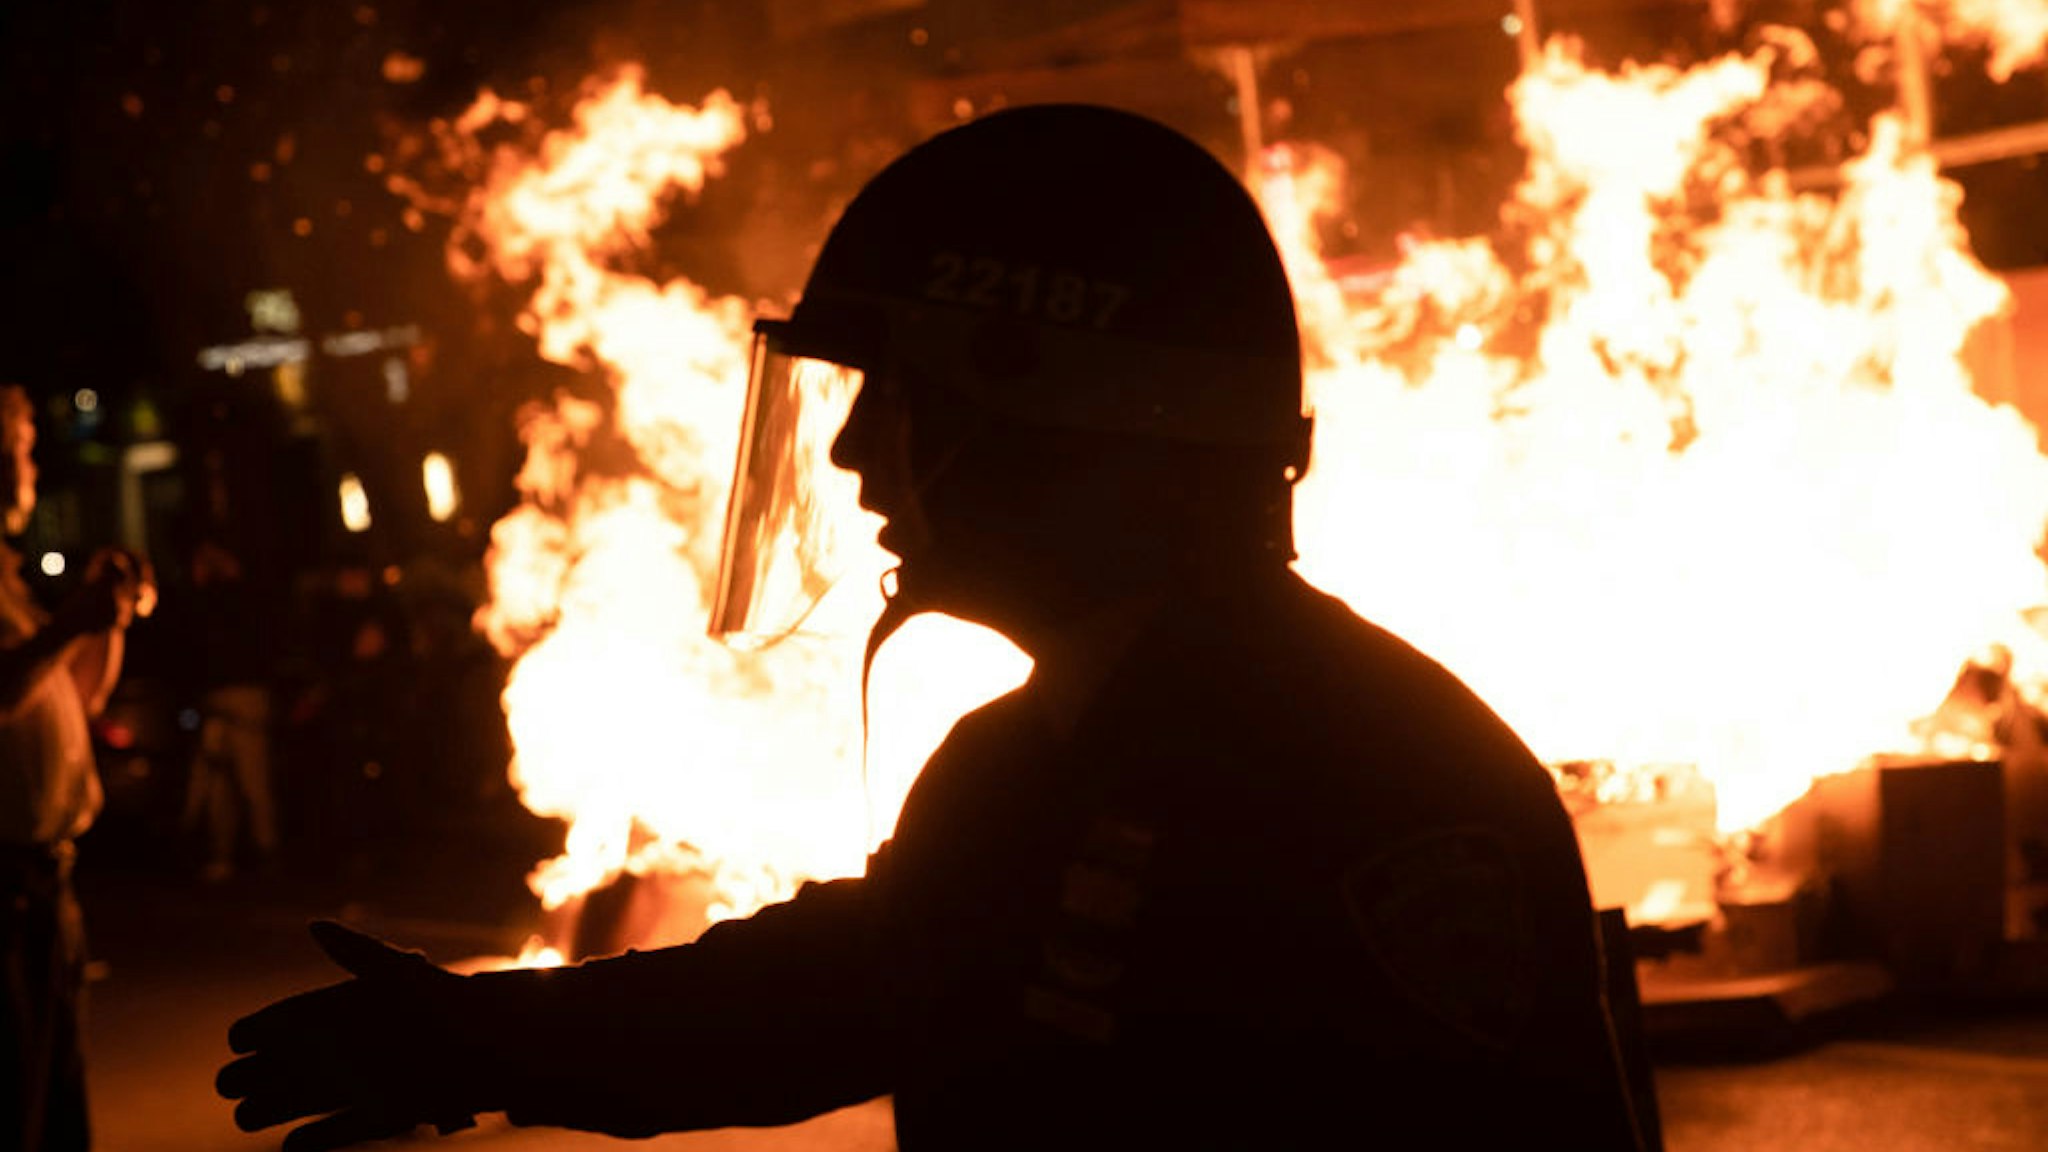 Police officers force protesters off the street after a fire was lit during an anti police brutality march in Manhattan.